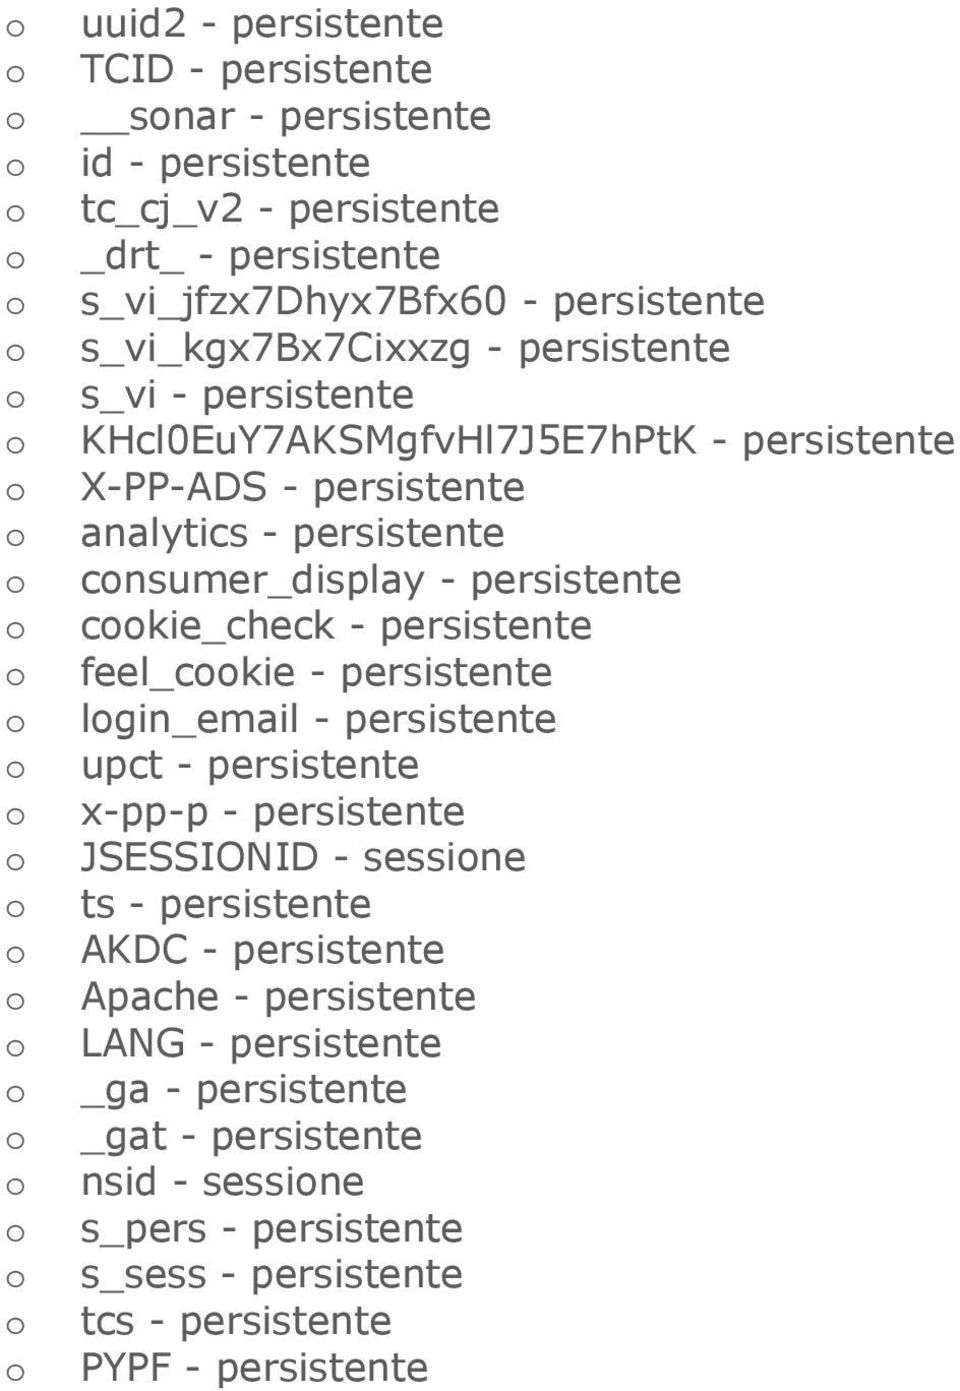 persistente ckie_check - persistente feel_ckie - persistente lgin_email - persistente upct - persistente x-pp-p - persistente JSESSIONID - sessine ts - persistente